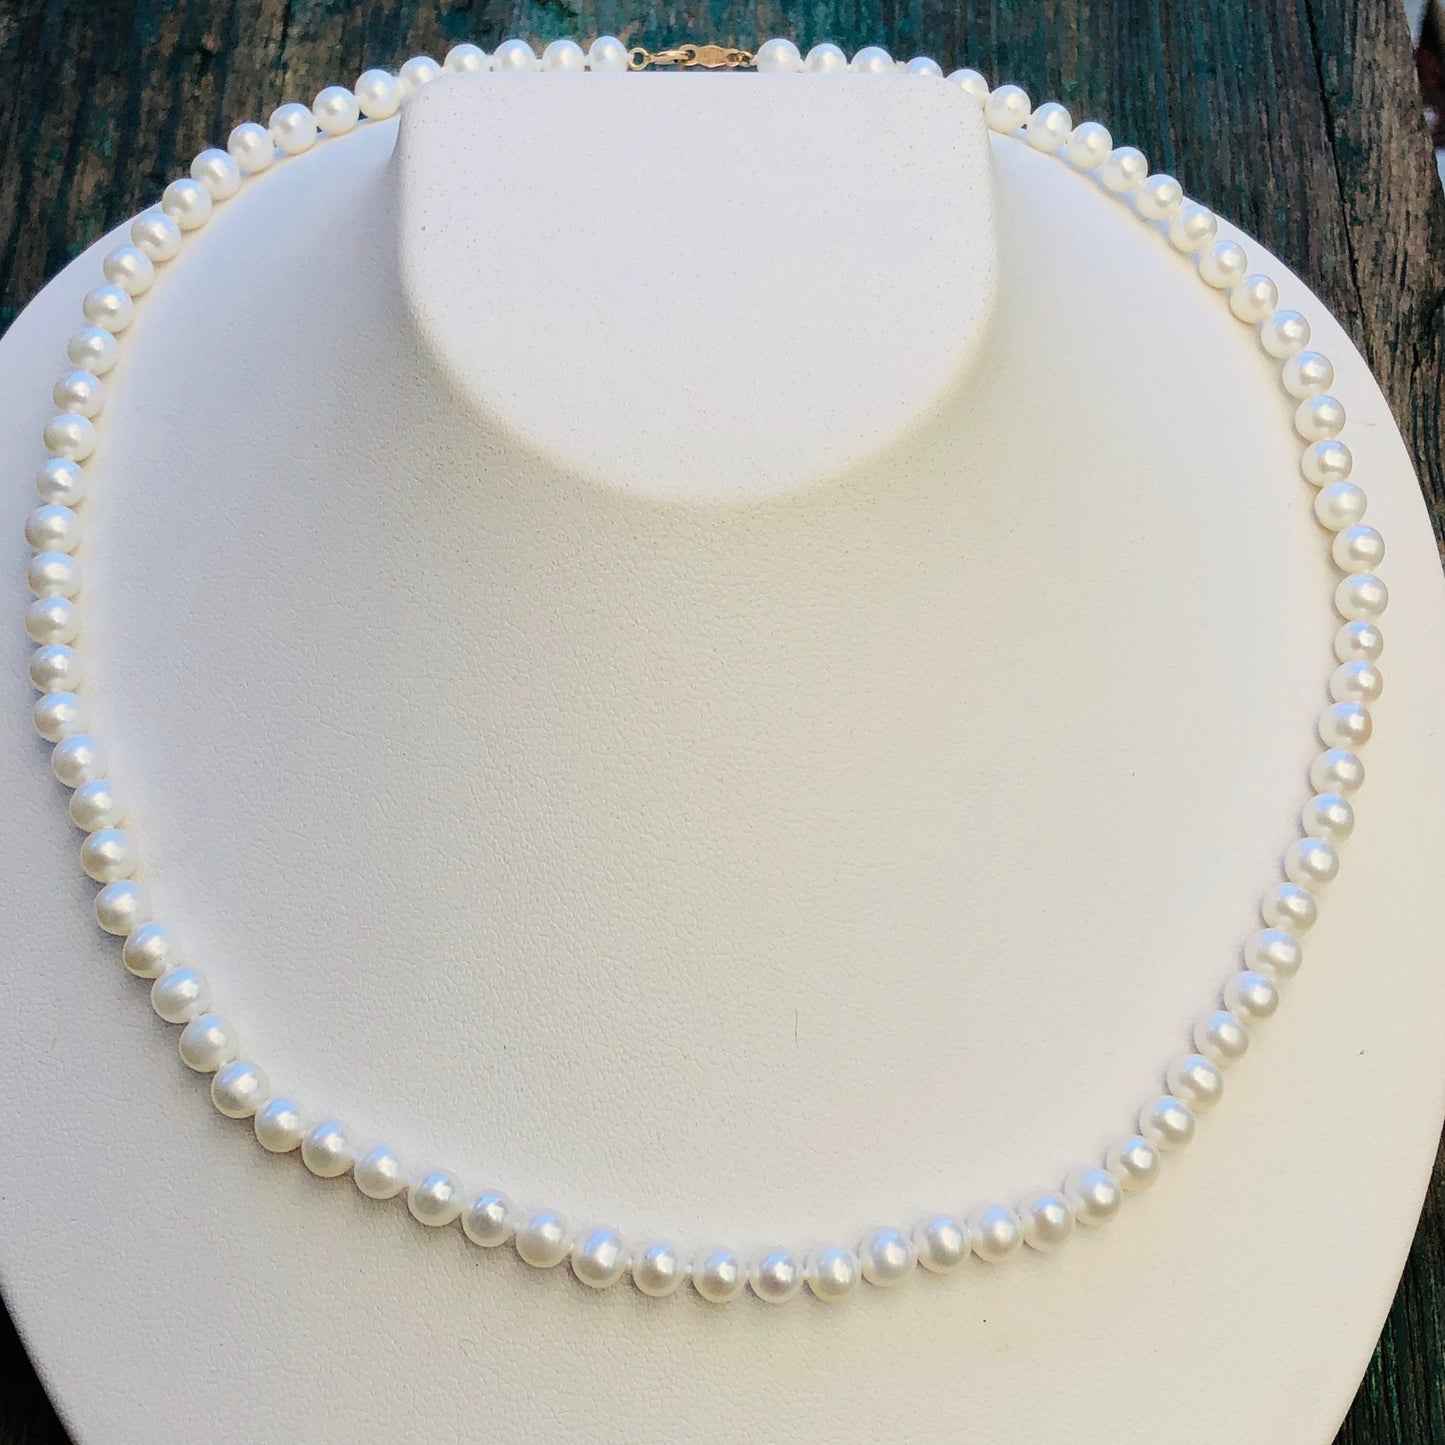 10k gold Freshwater Genuine Pearl Necklace 18”